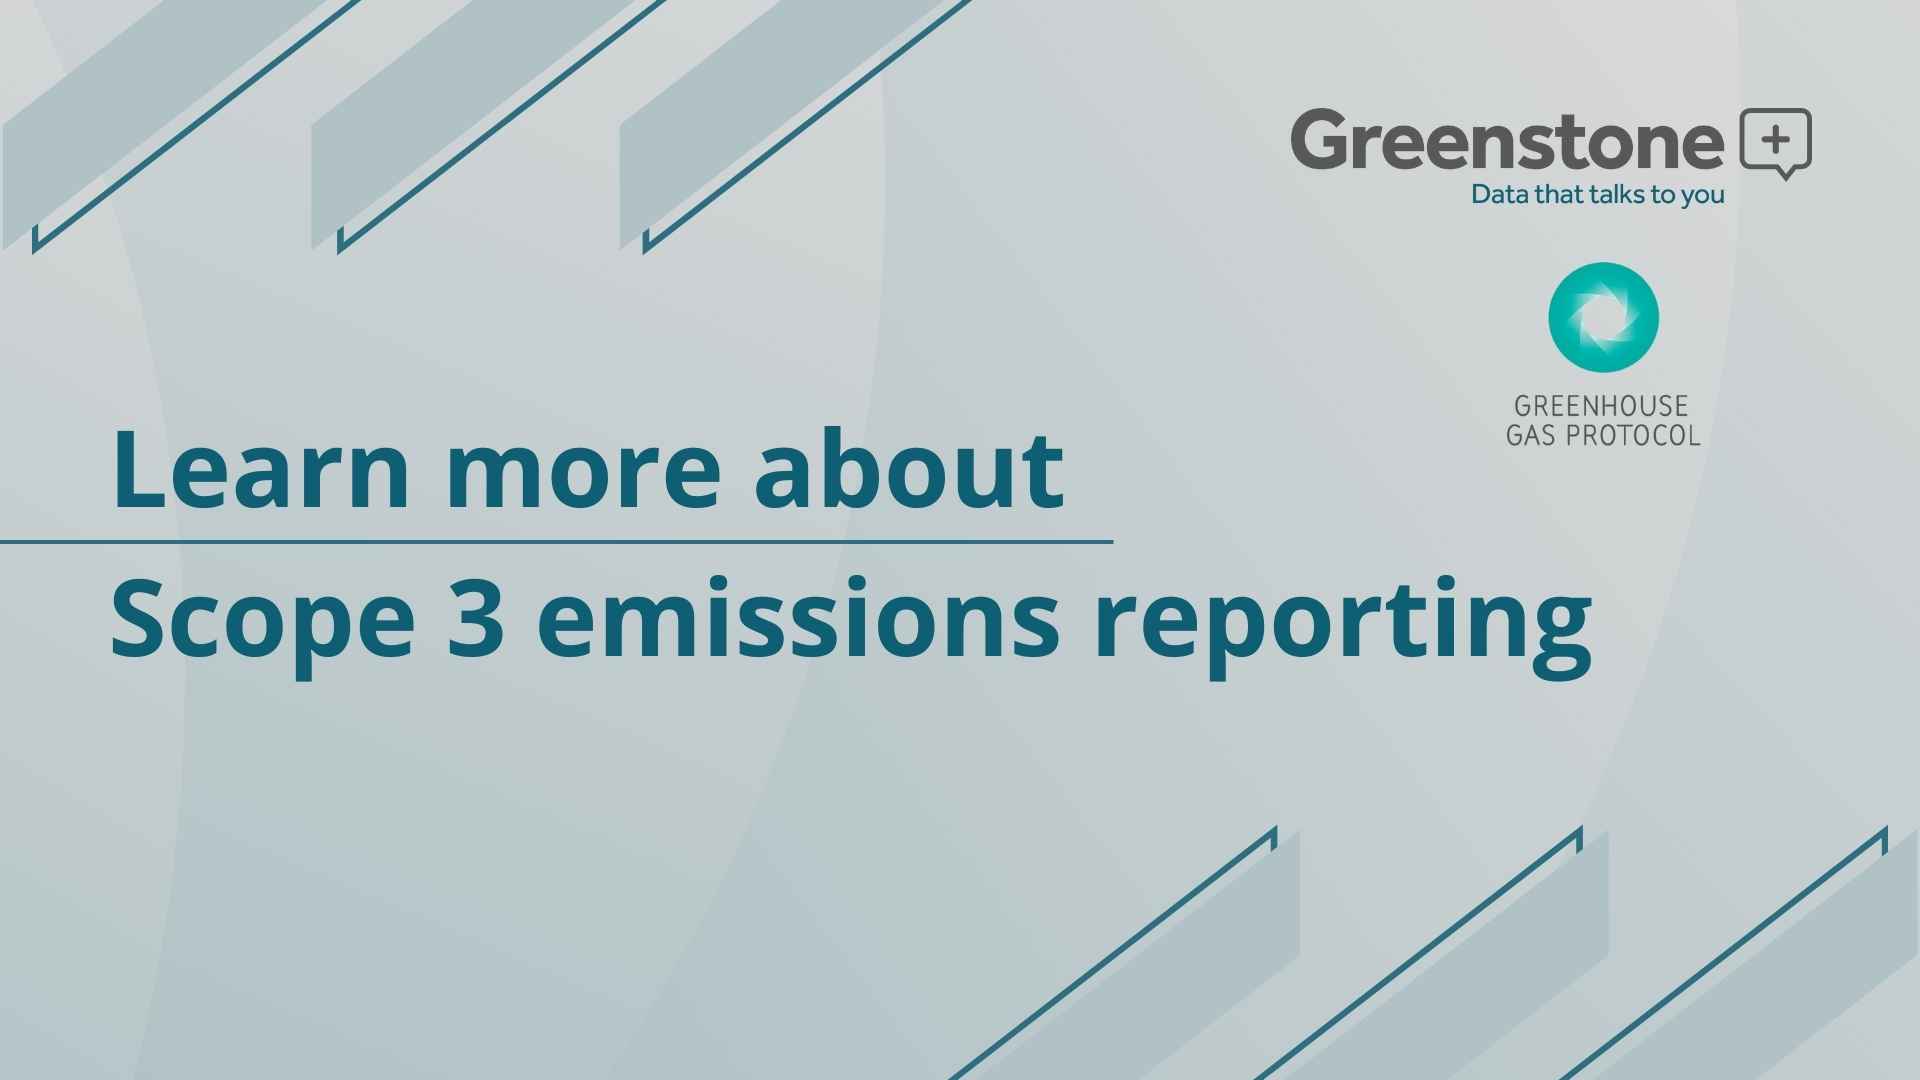 Greenstone & Scope 3 emissions calculation and reporting